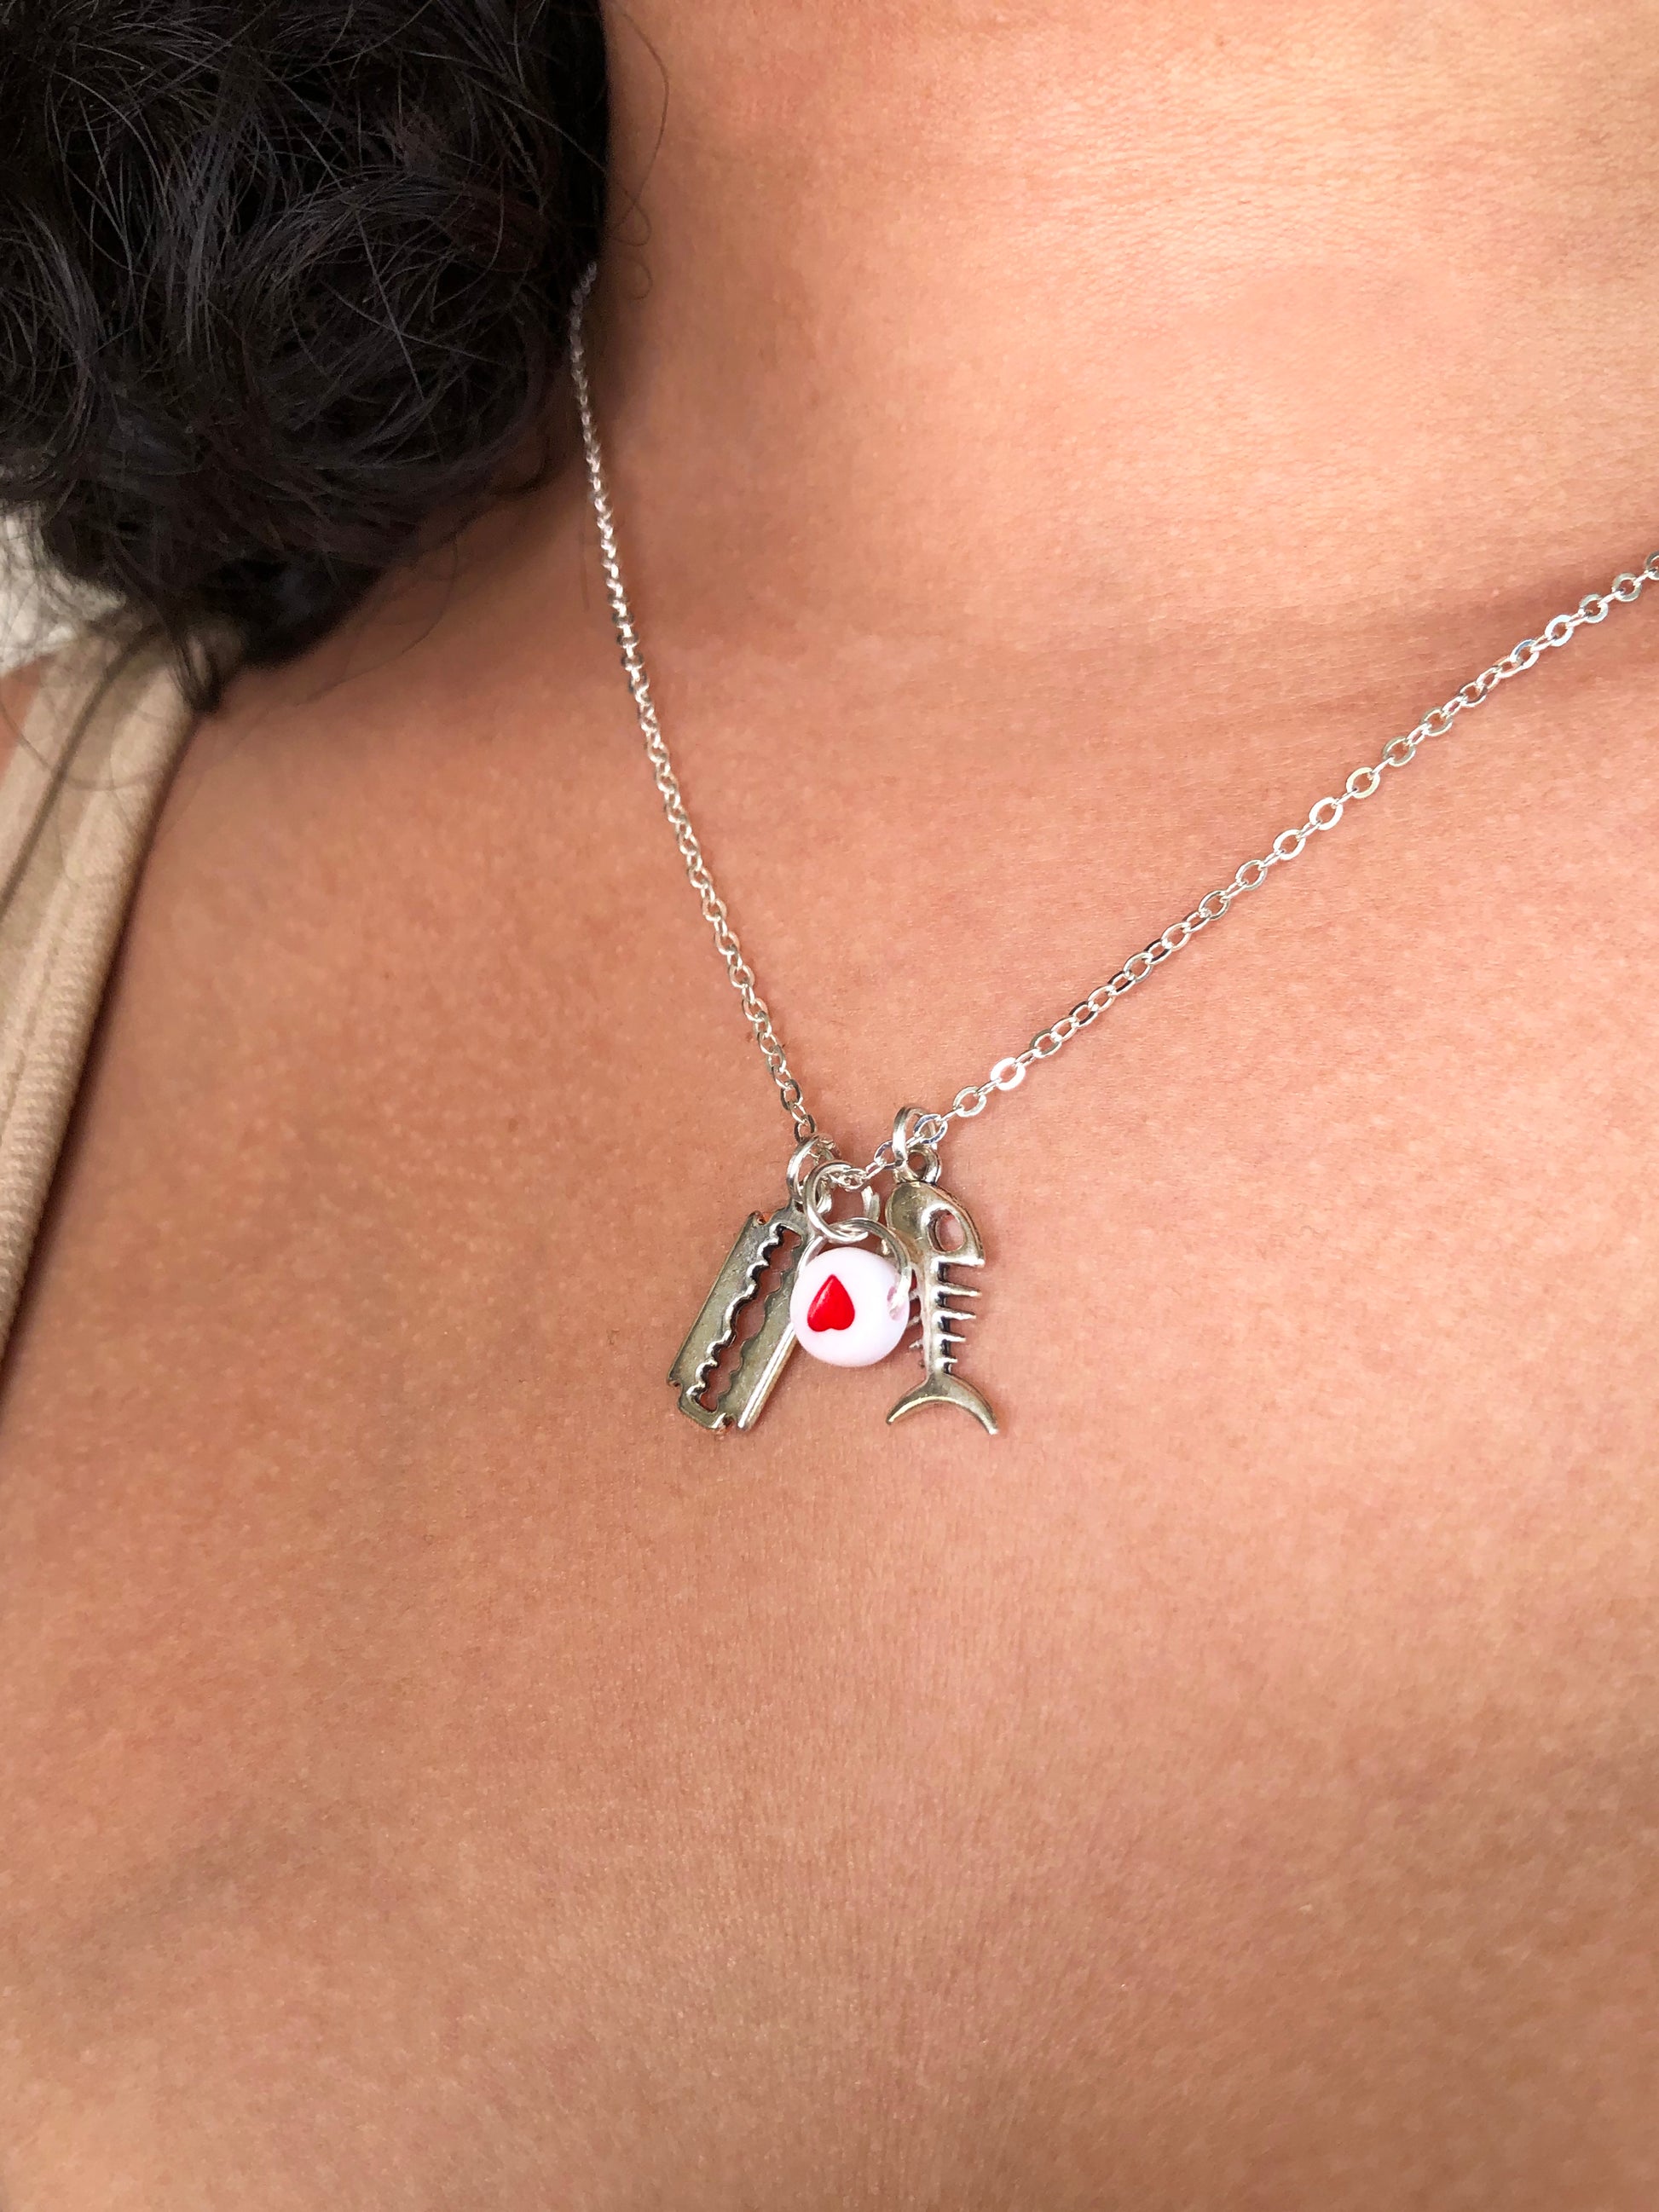 Handmade pendant necklace with a red flat round heart bead, a silver razor blade and skeleton fish charm.